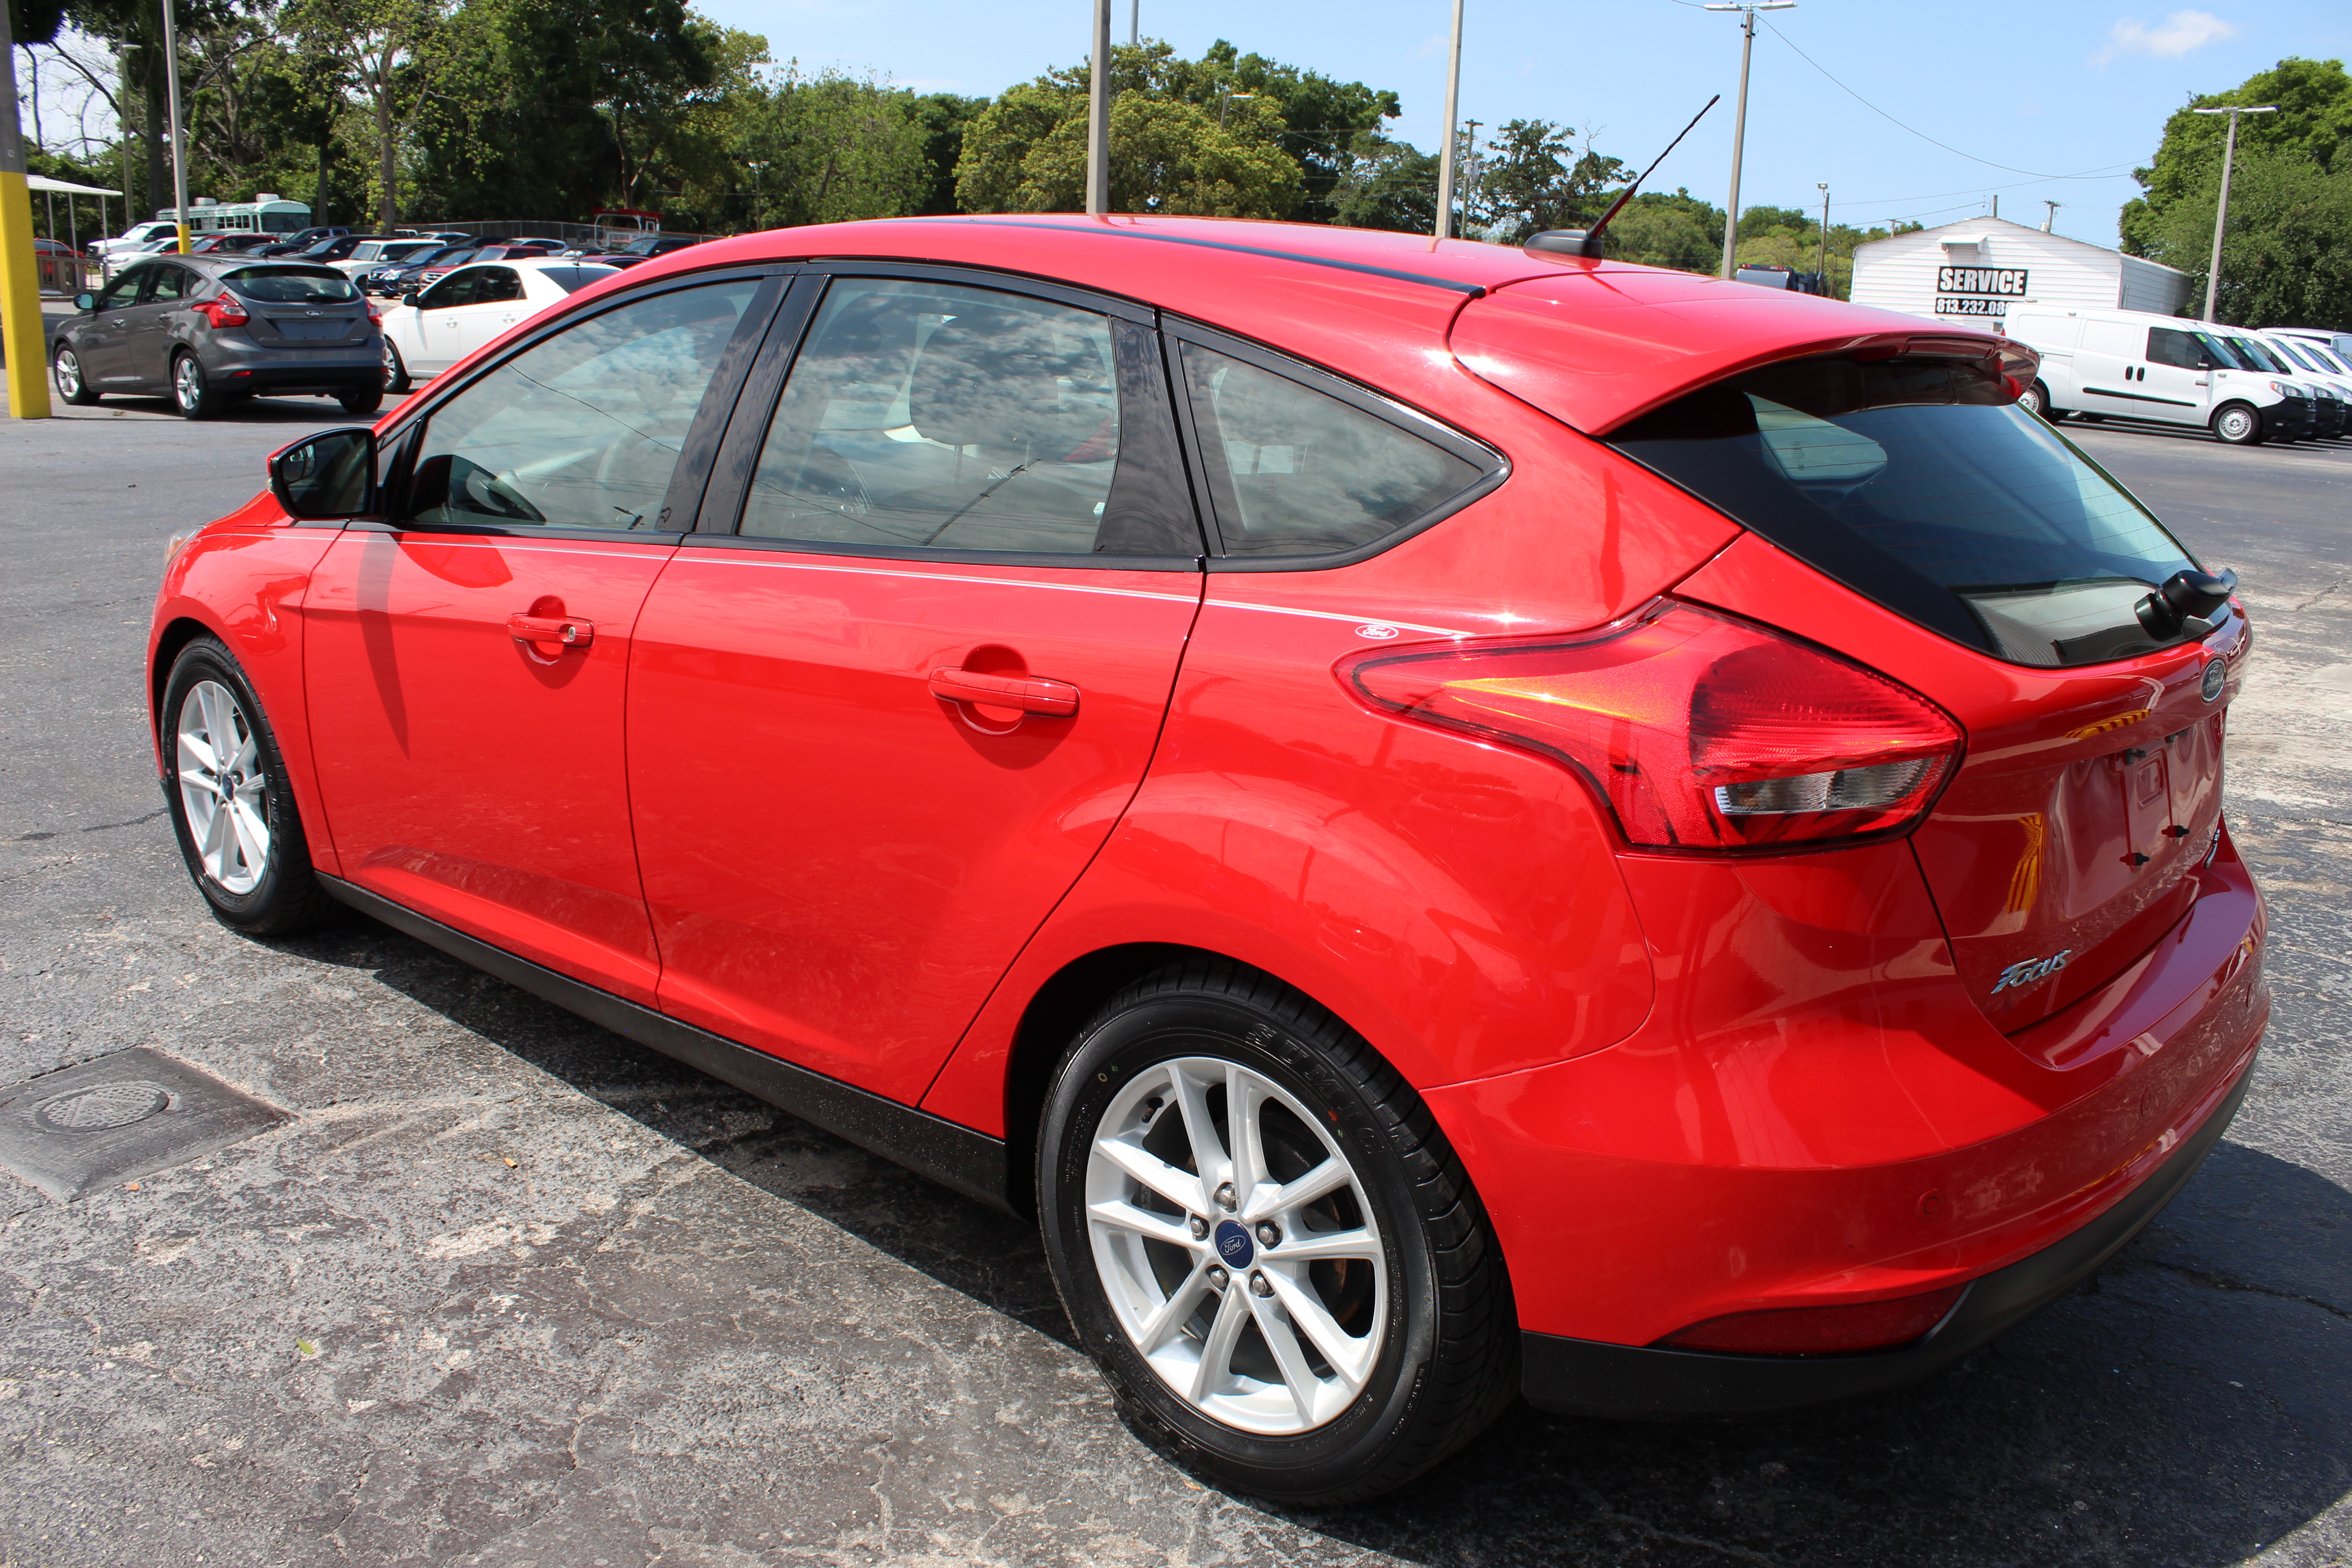 PreOwned 2015 Ford Focus SE Hatchback 4 Dr. in Tampa